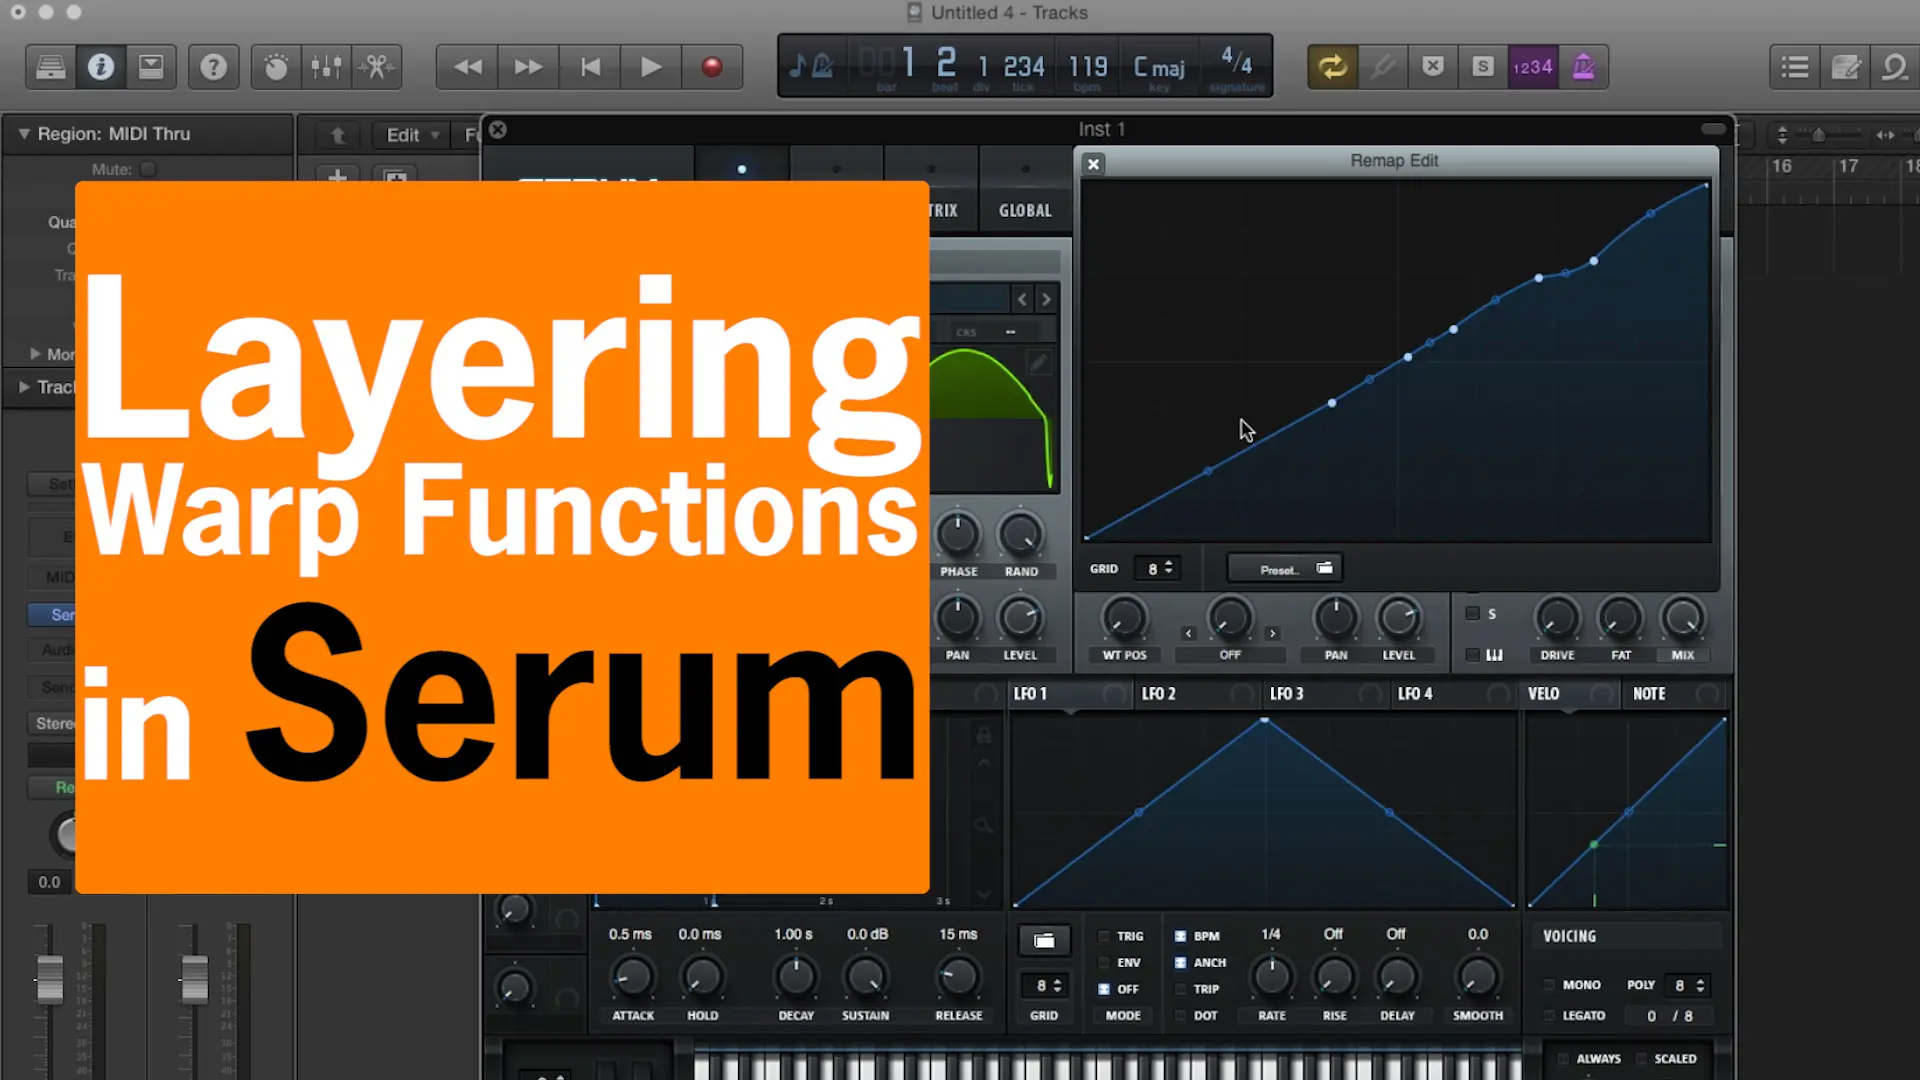 Layering warp functions in serum for music production and beatmaking.